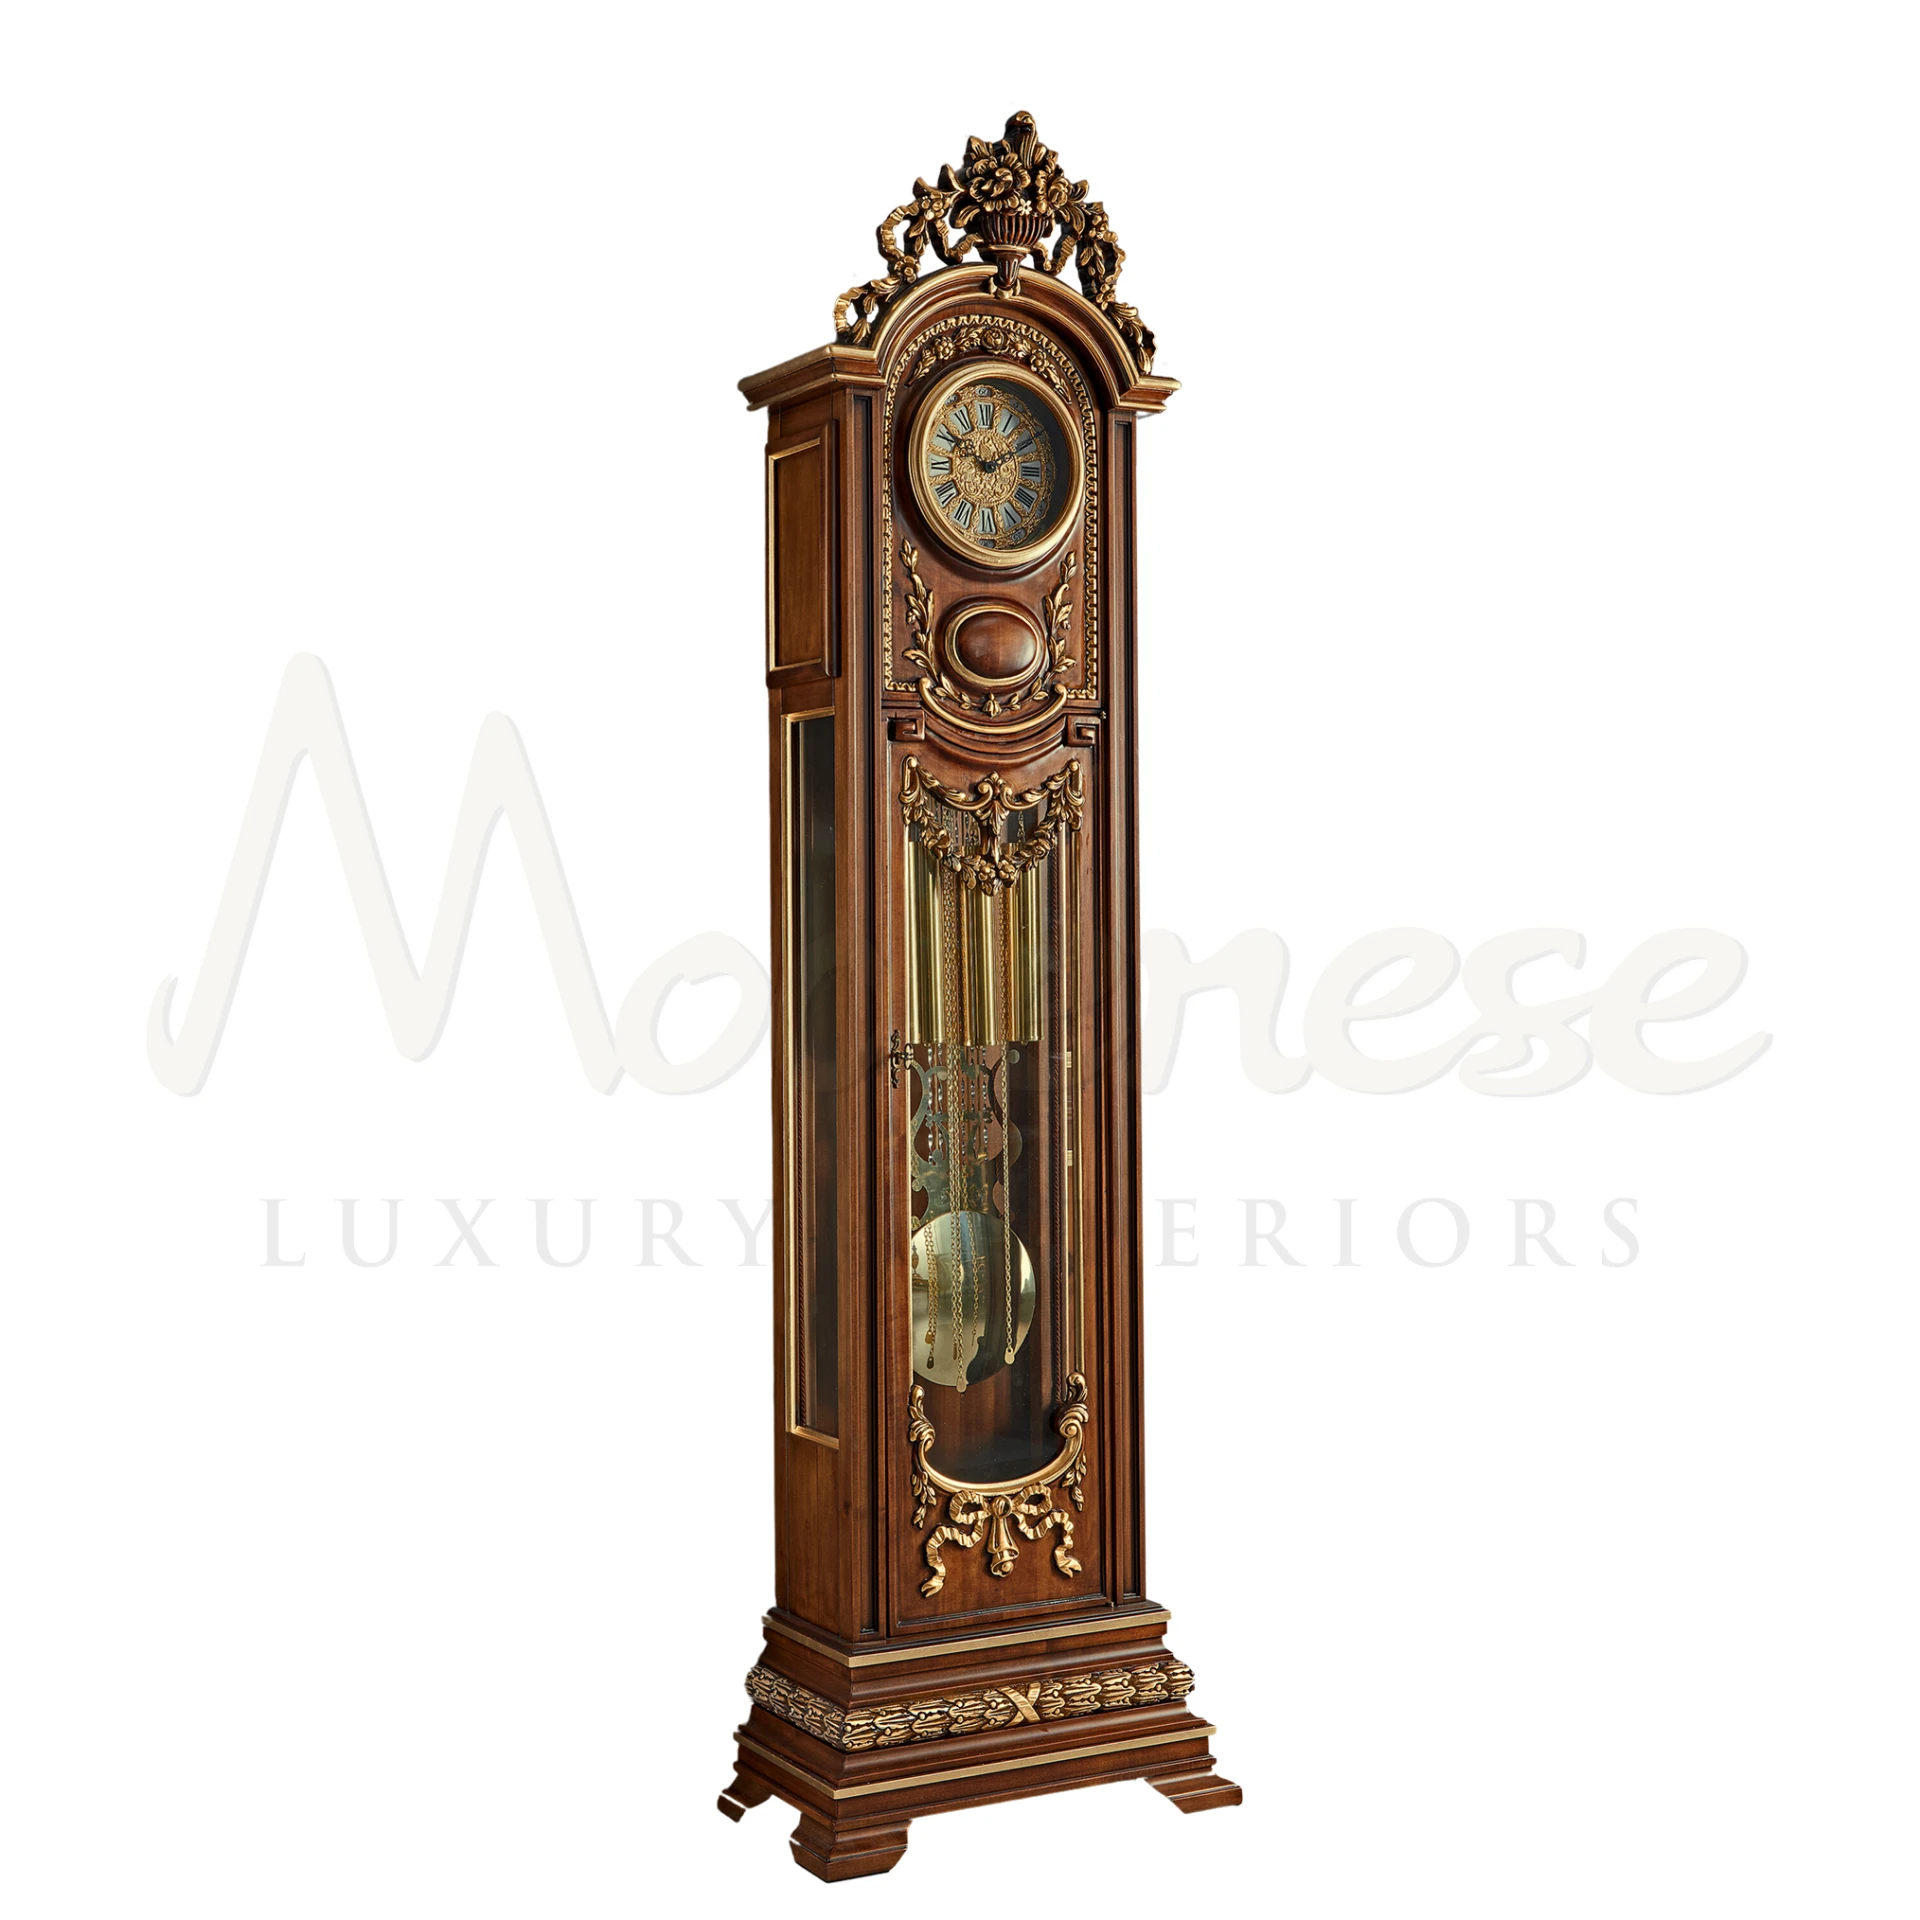 Unique Grandfather Clock with old-world charm, a luxury addition to refined home decor and interior design.